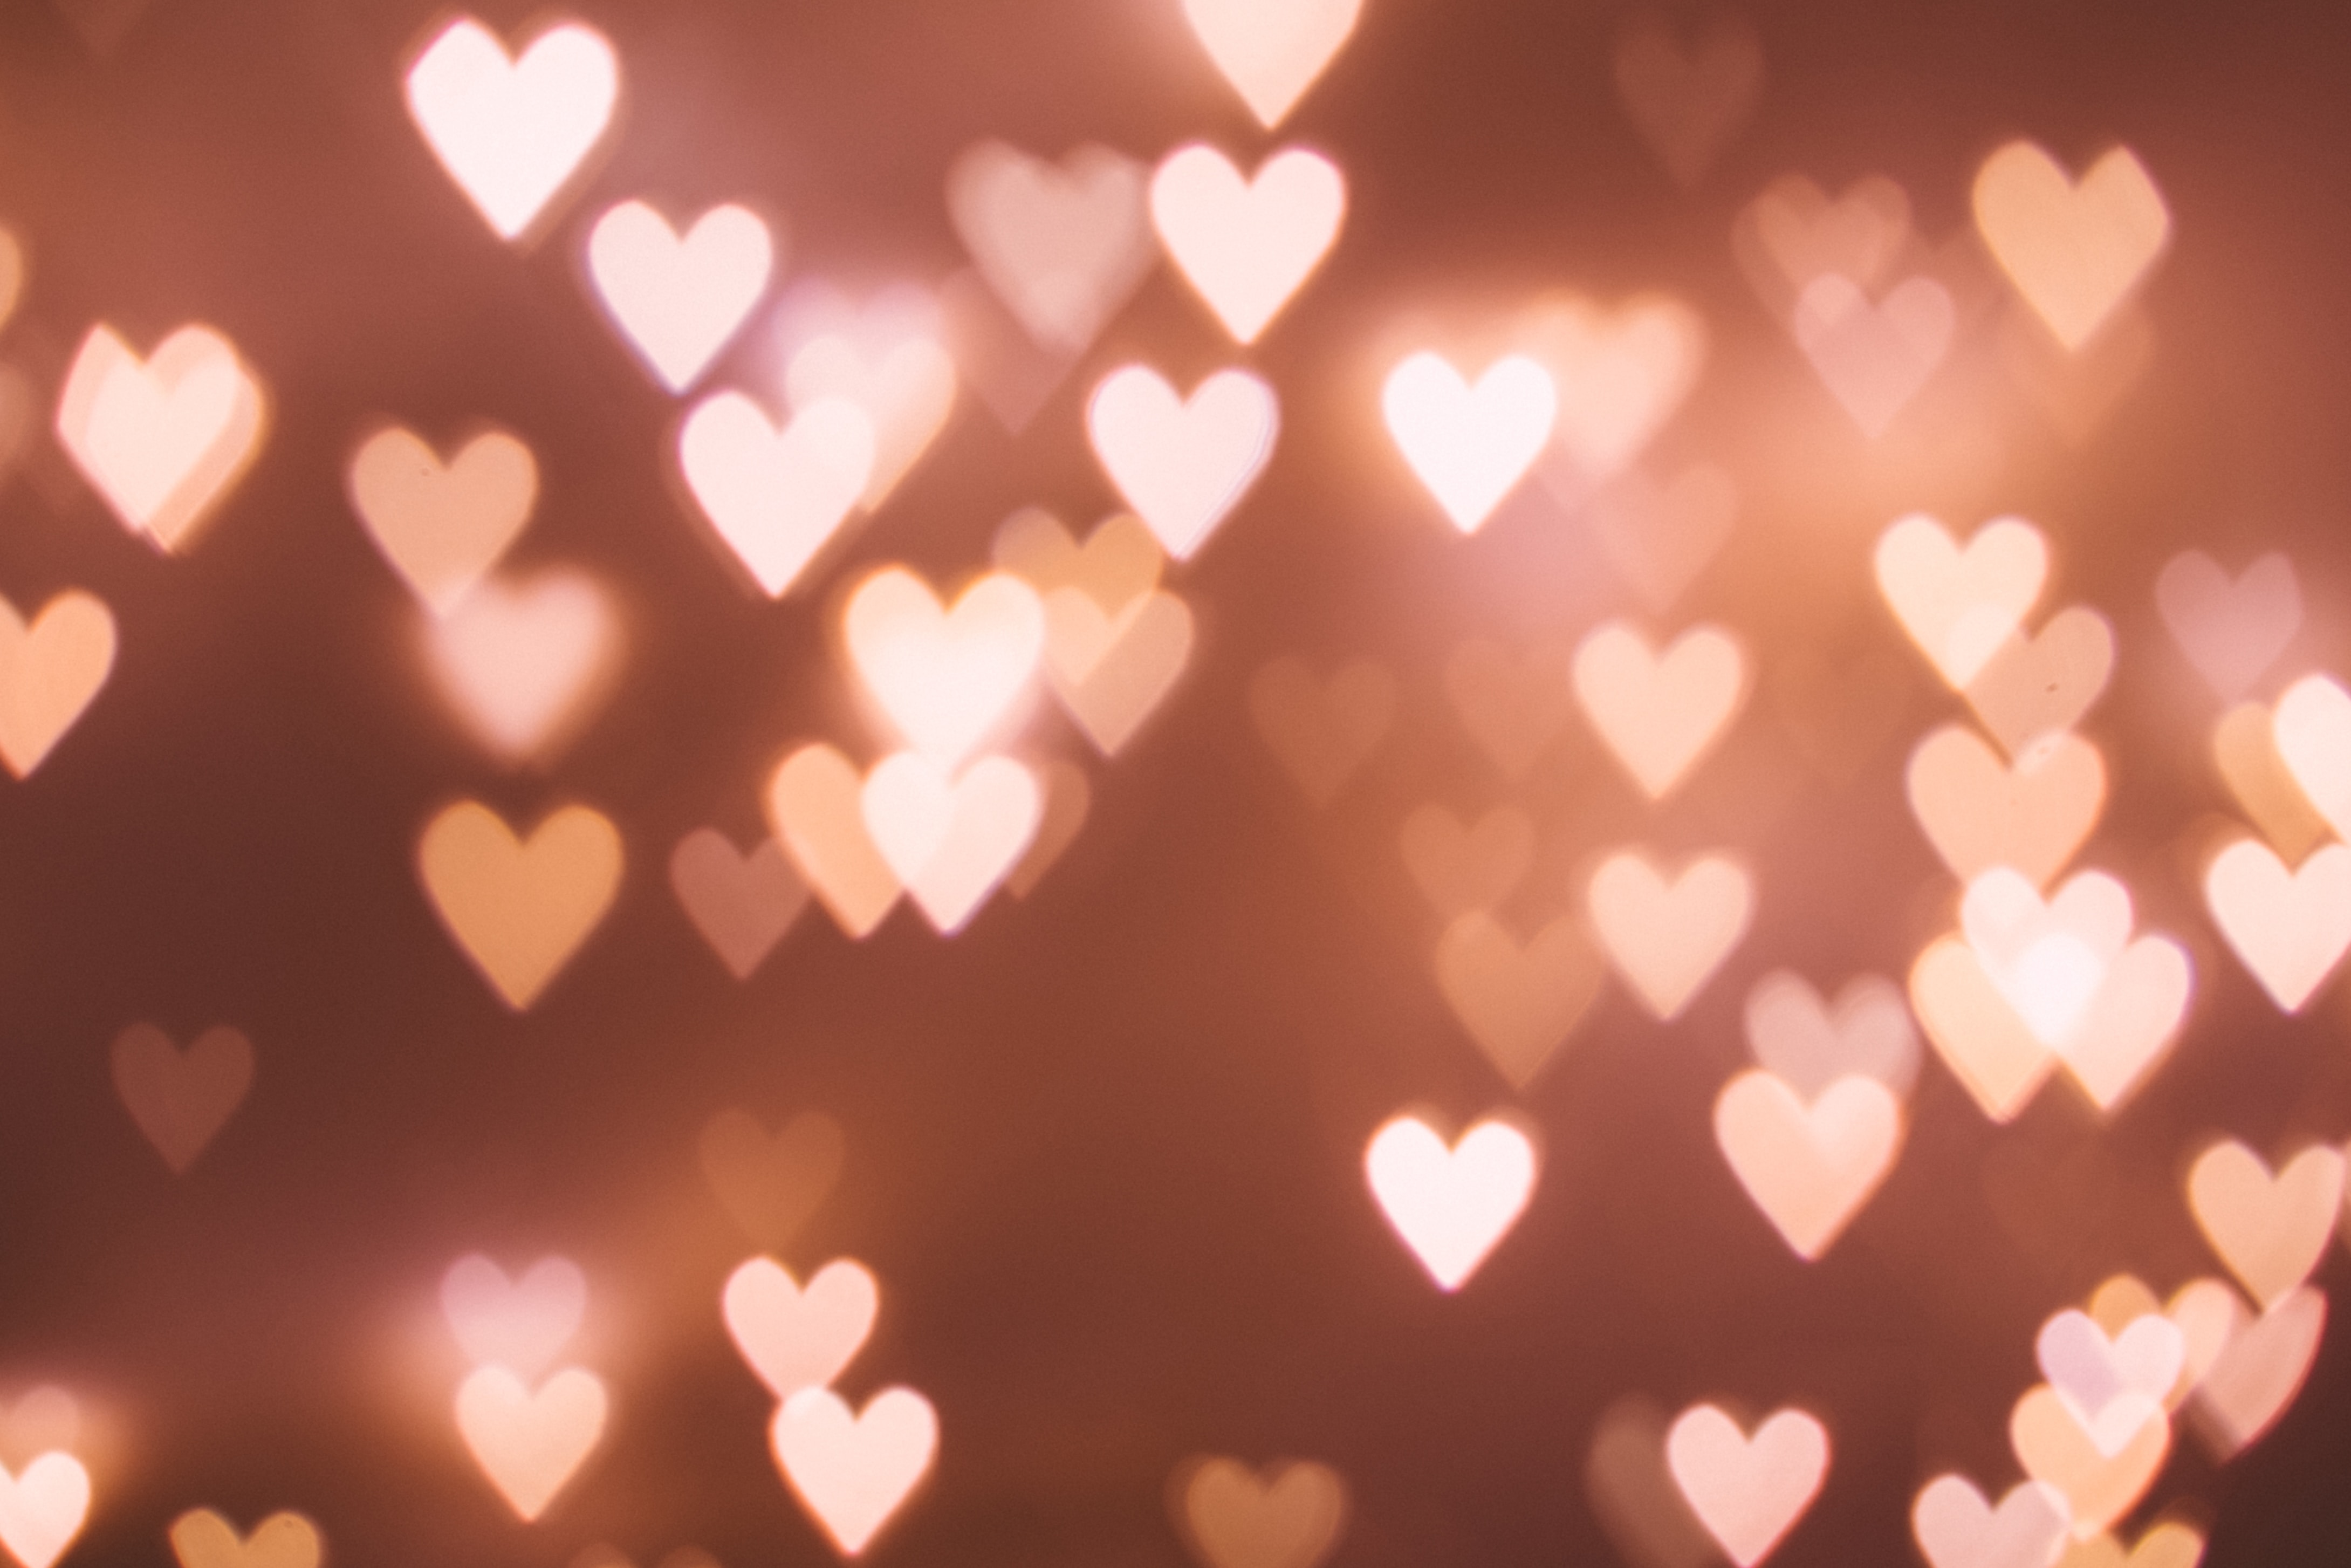 hearts bokeh lights background image by @freetoedit.